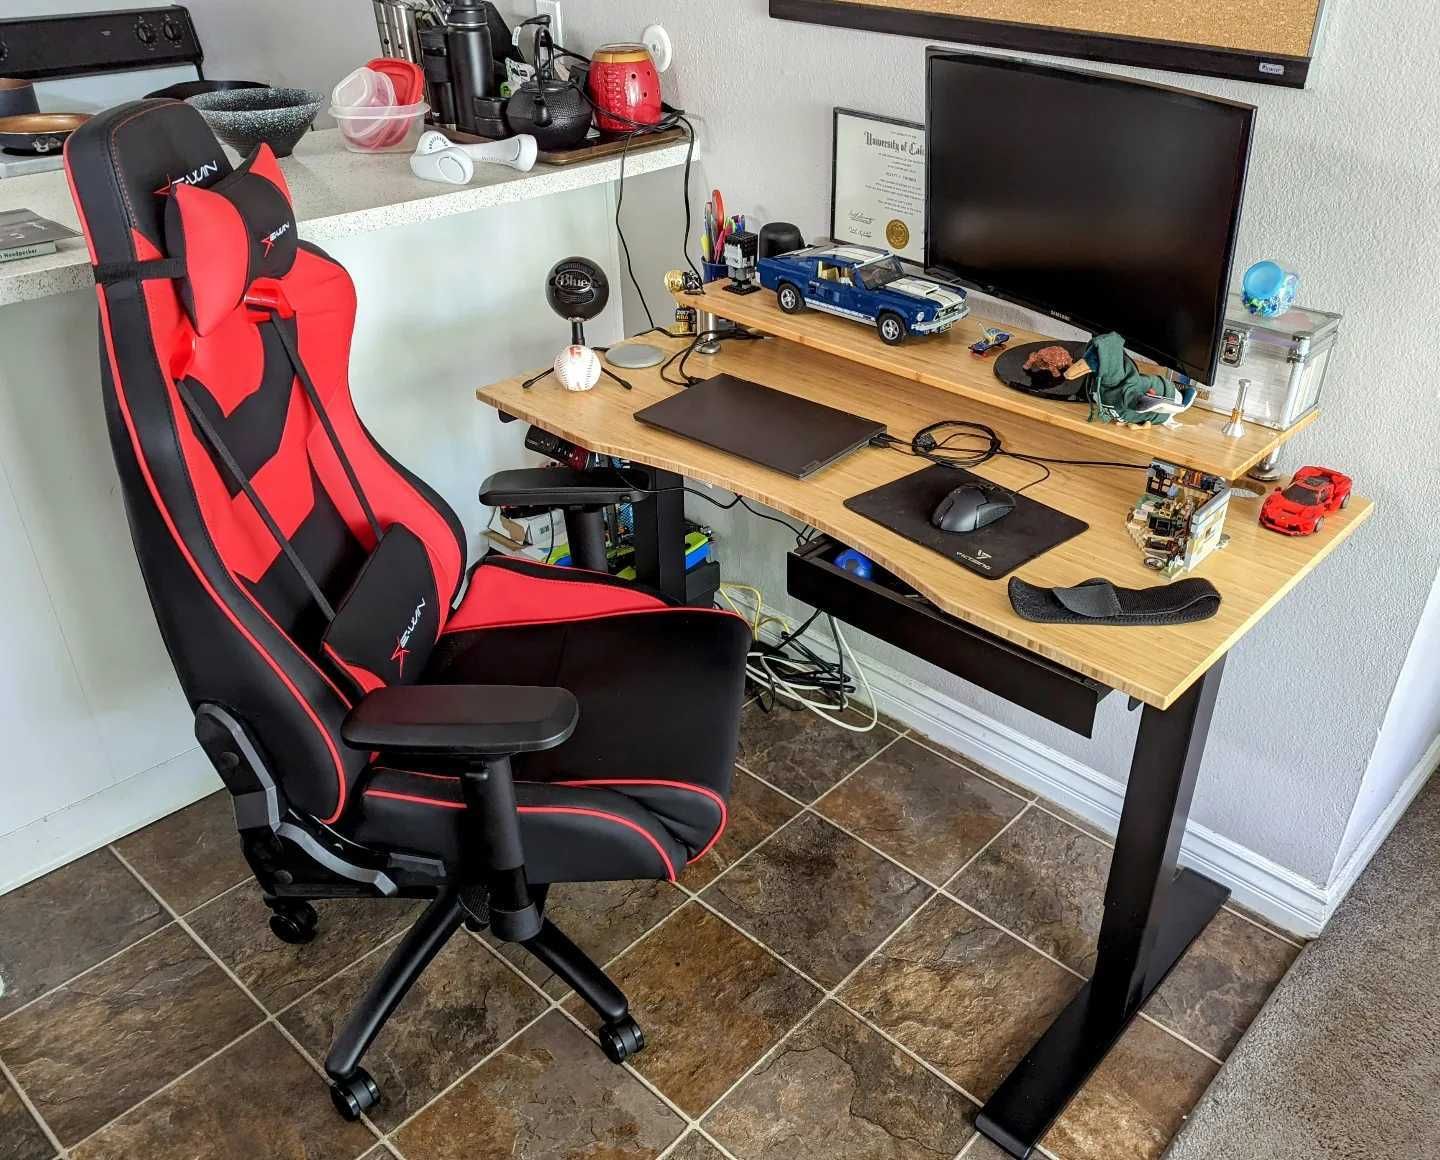 An image of the E-Win Flash XL gaming chair on a desk